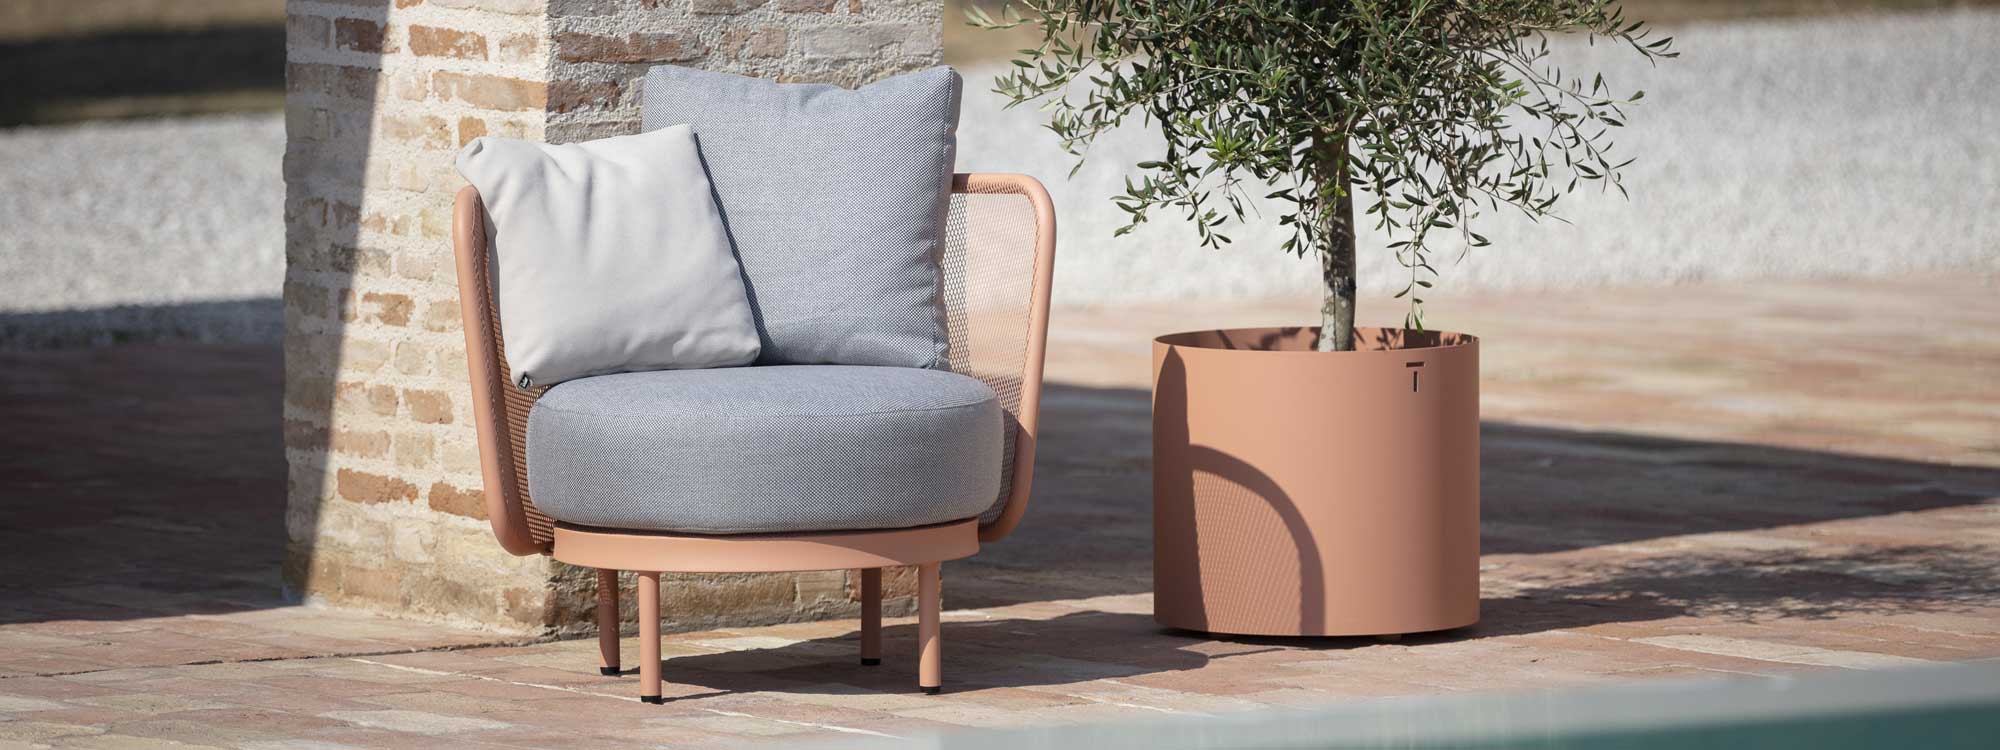 Image of salmon-pink Baza Club modern garden chair and Verdi contemporary planter with small olive tree within